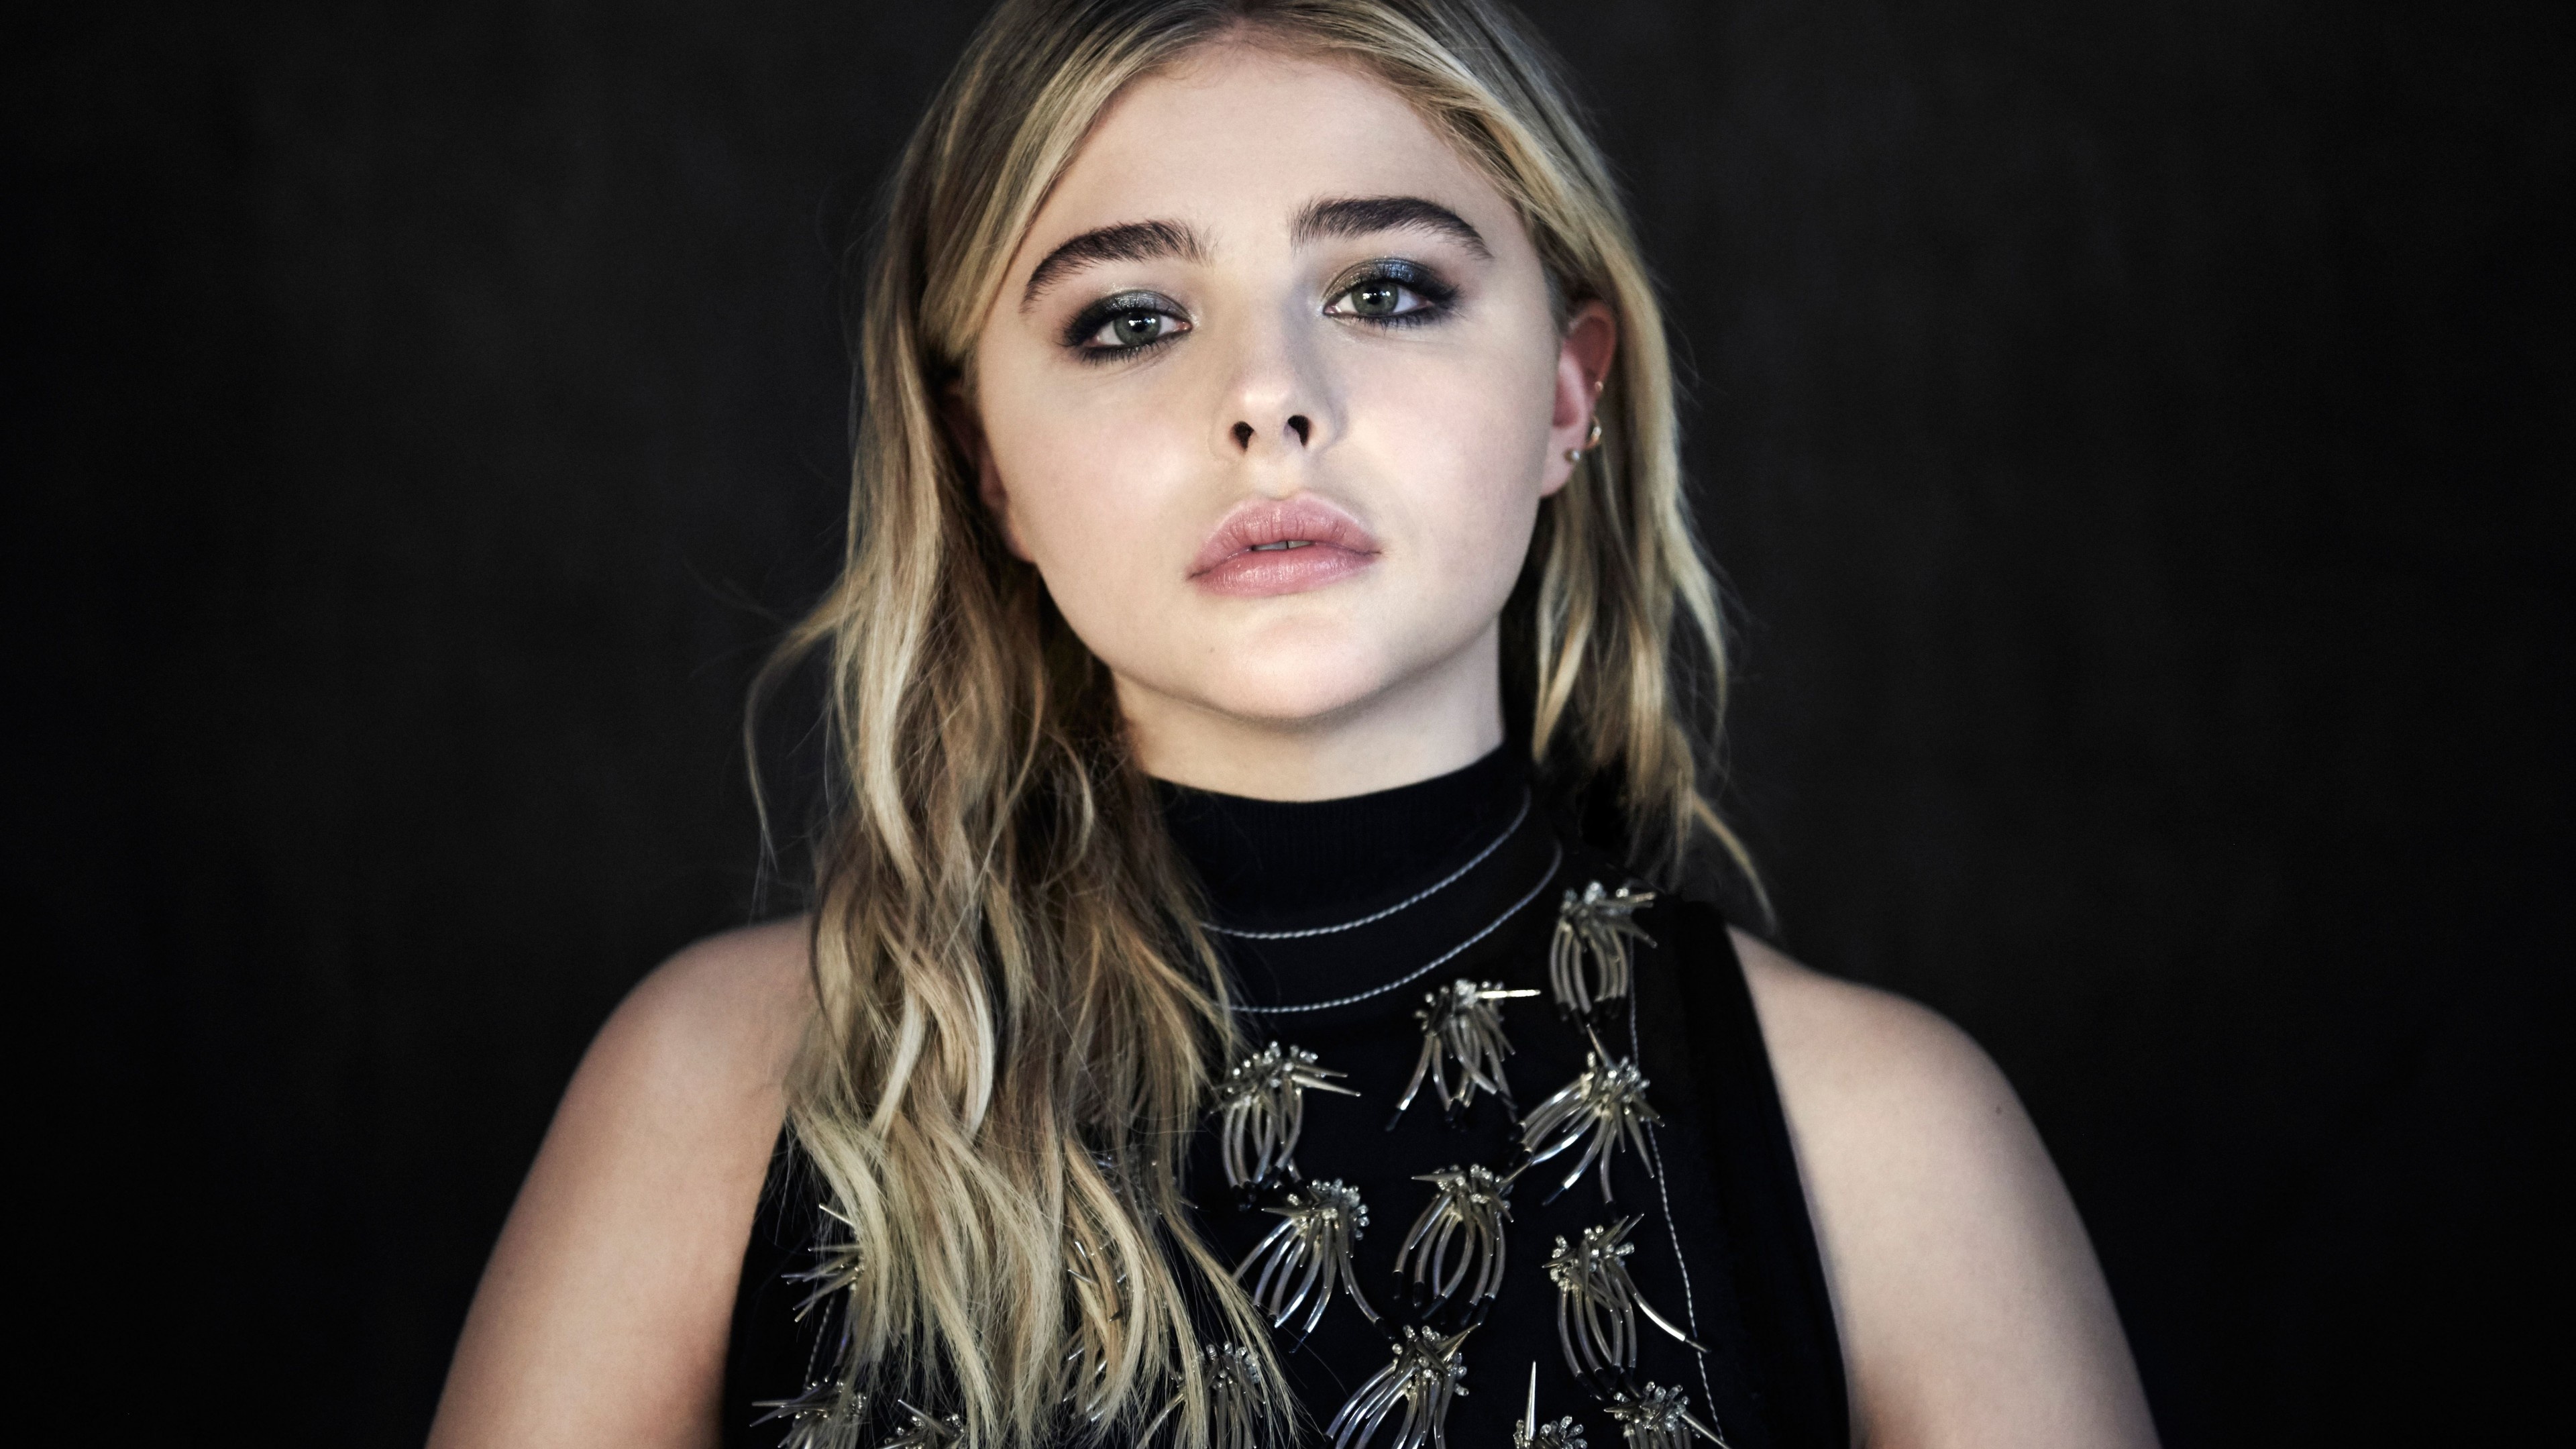 Chloe Moretz: Played Cassie Sullivan in the science fiction action film The 5th Wave (2016). 3840x2160 4K Wallpaper.